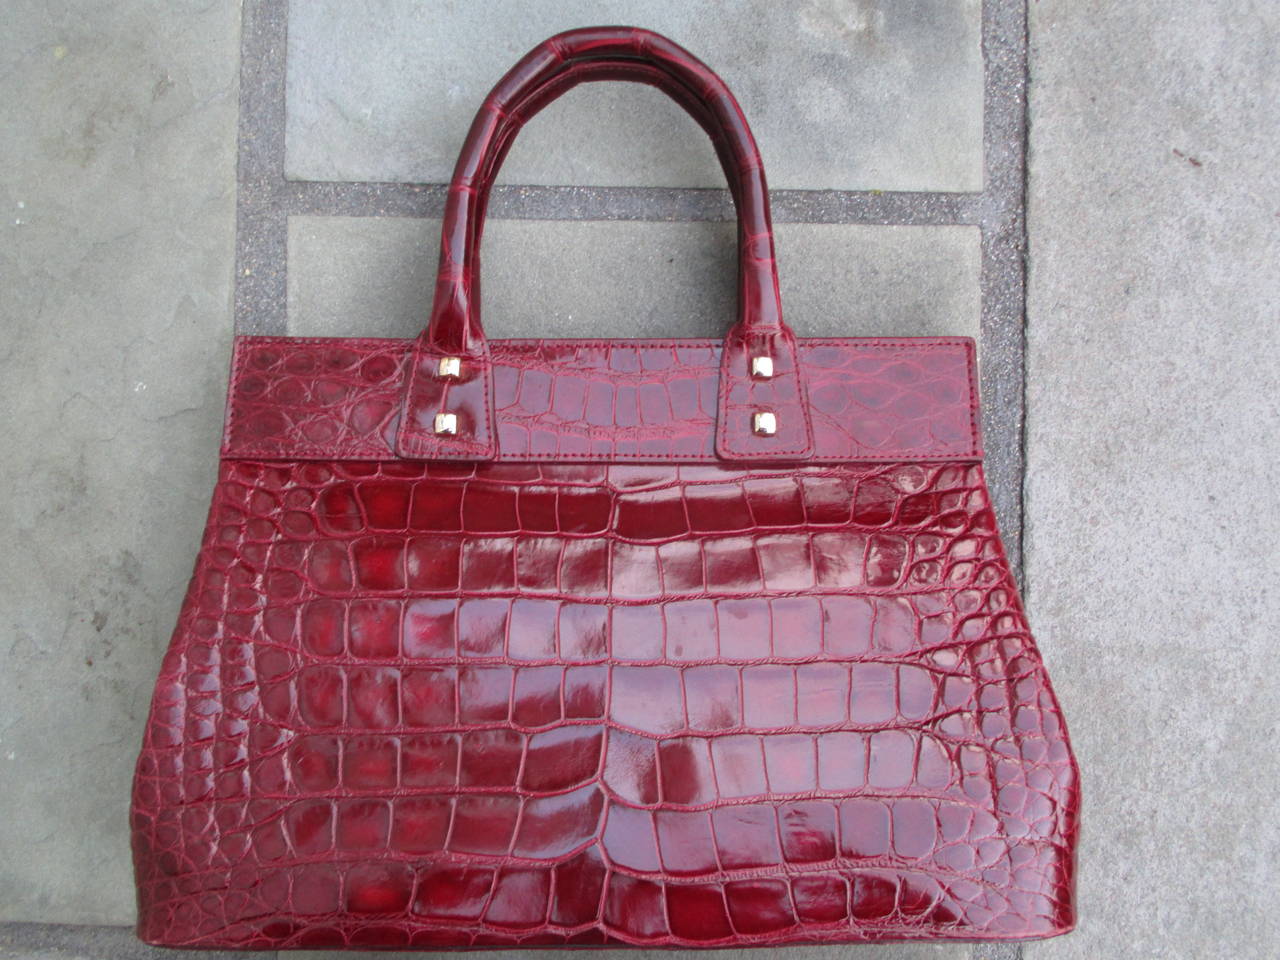 Donna Karan Rouge  Alligator / Crocodile Lock Tote.
This is an exquisite bag. All the press for this piece called it Crocodile.
The stamp and tag read alligator.
$4995 retail